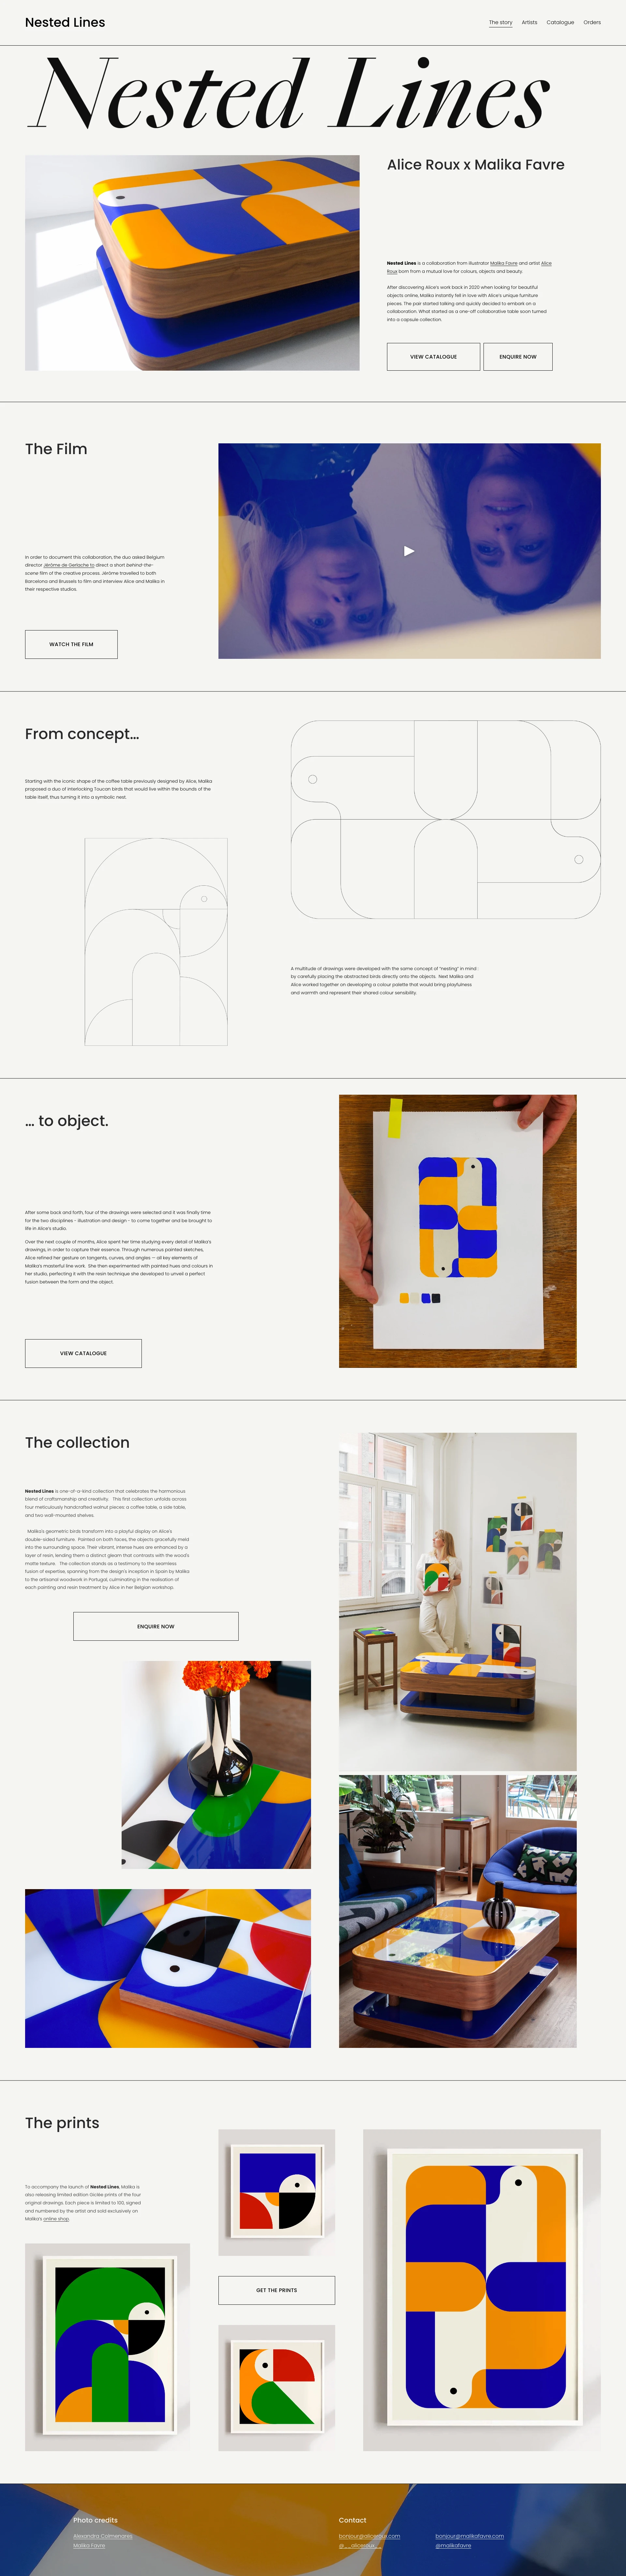 Nested Lines Landing Page Example: Nested Lines is a collaboration from illustrator Malika Favre and artist Alice Roux born from a mutual love for colours, objects and beauty.